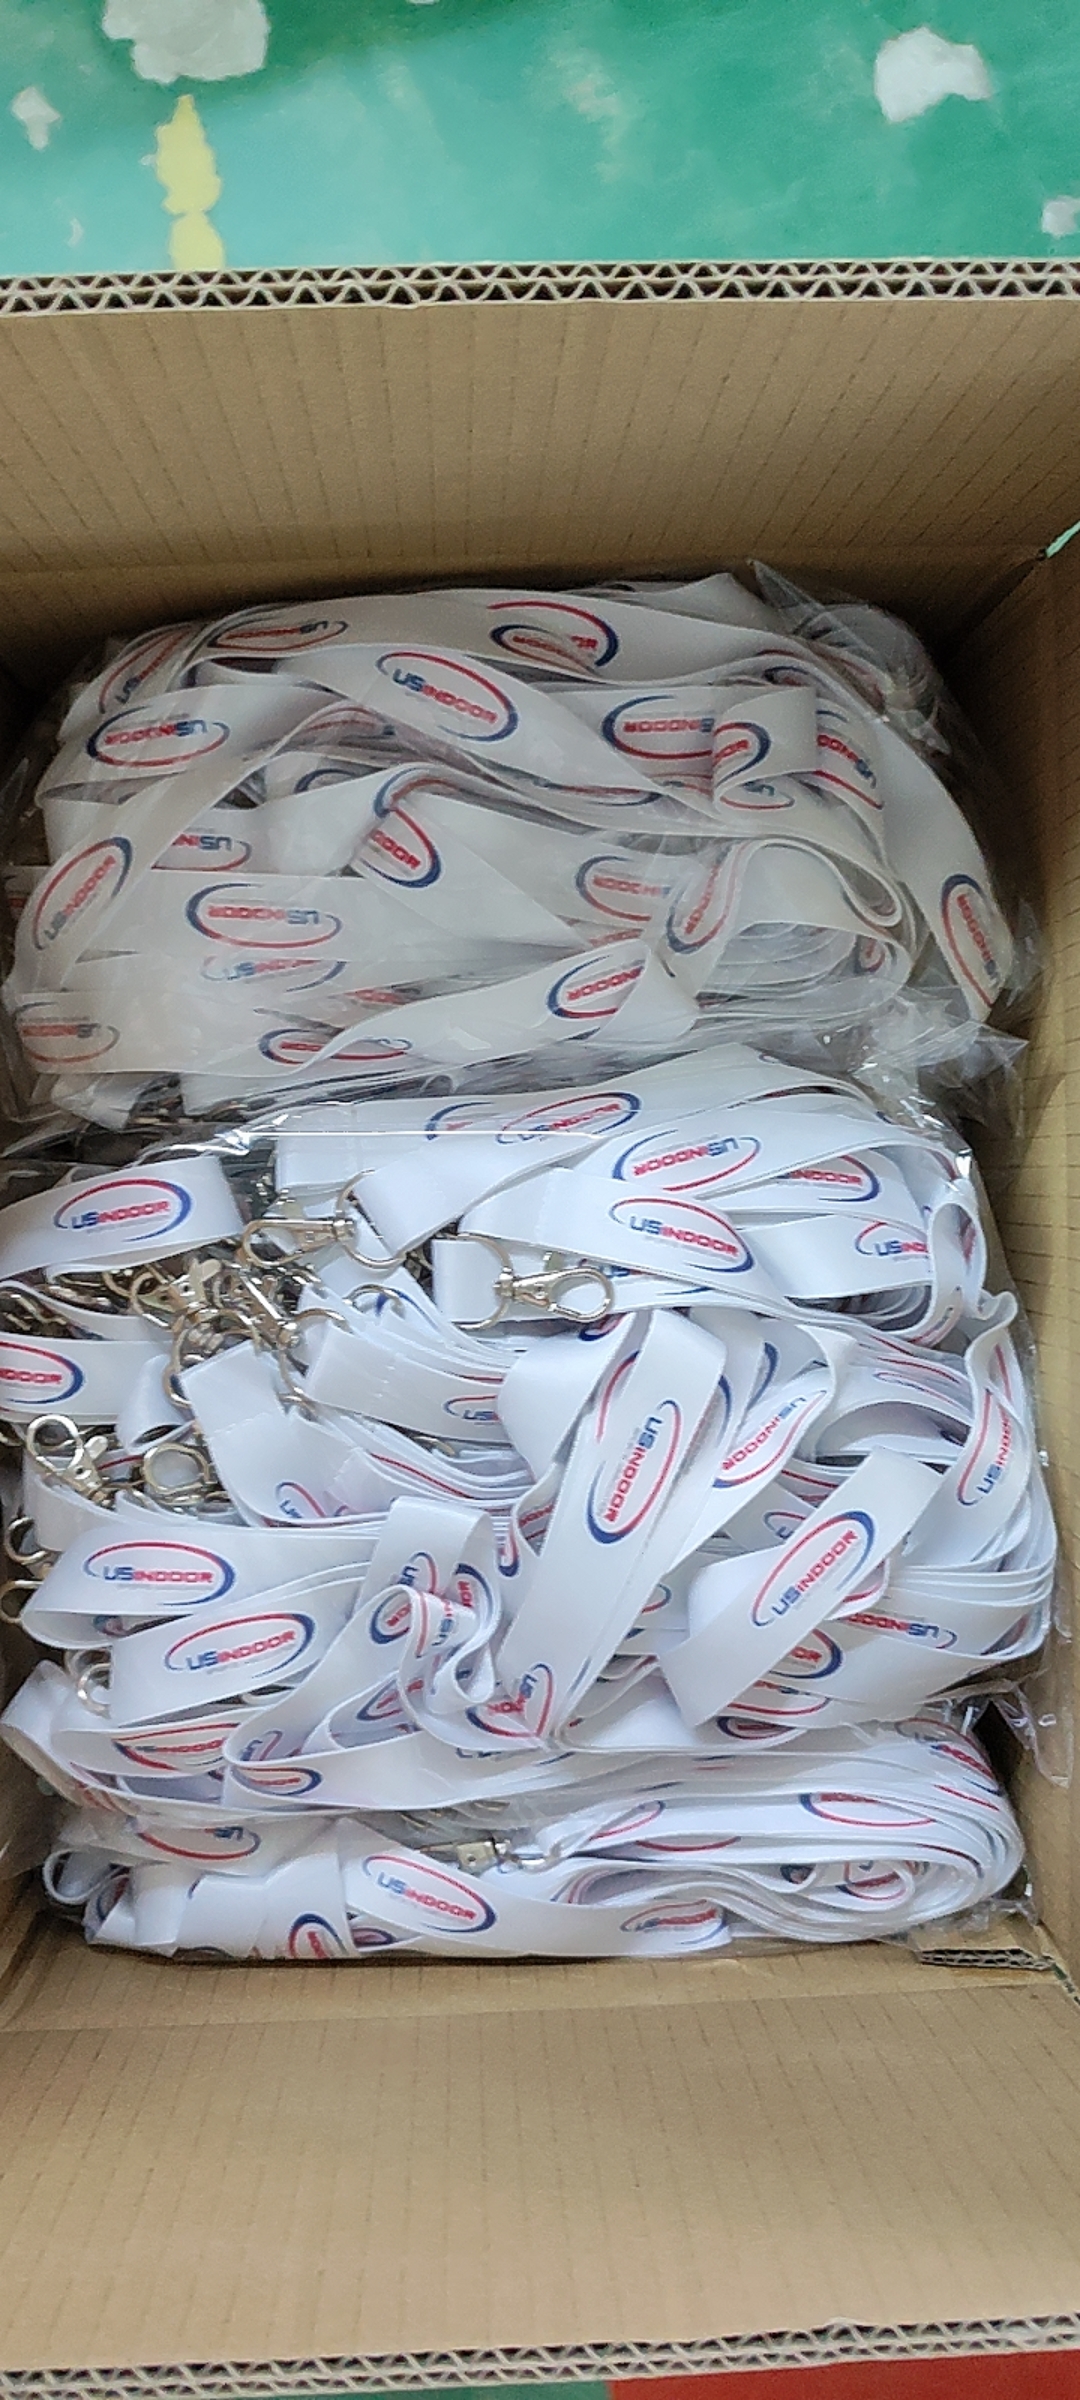 Stand Out with Custom Printed Lanyards from Promogator.com